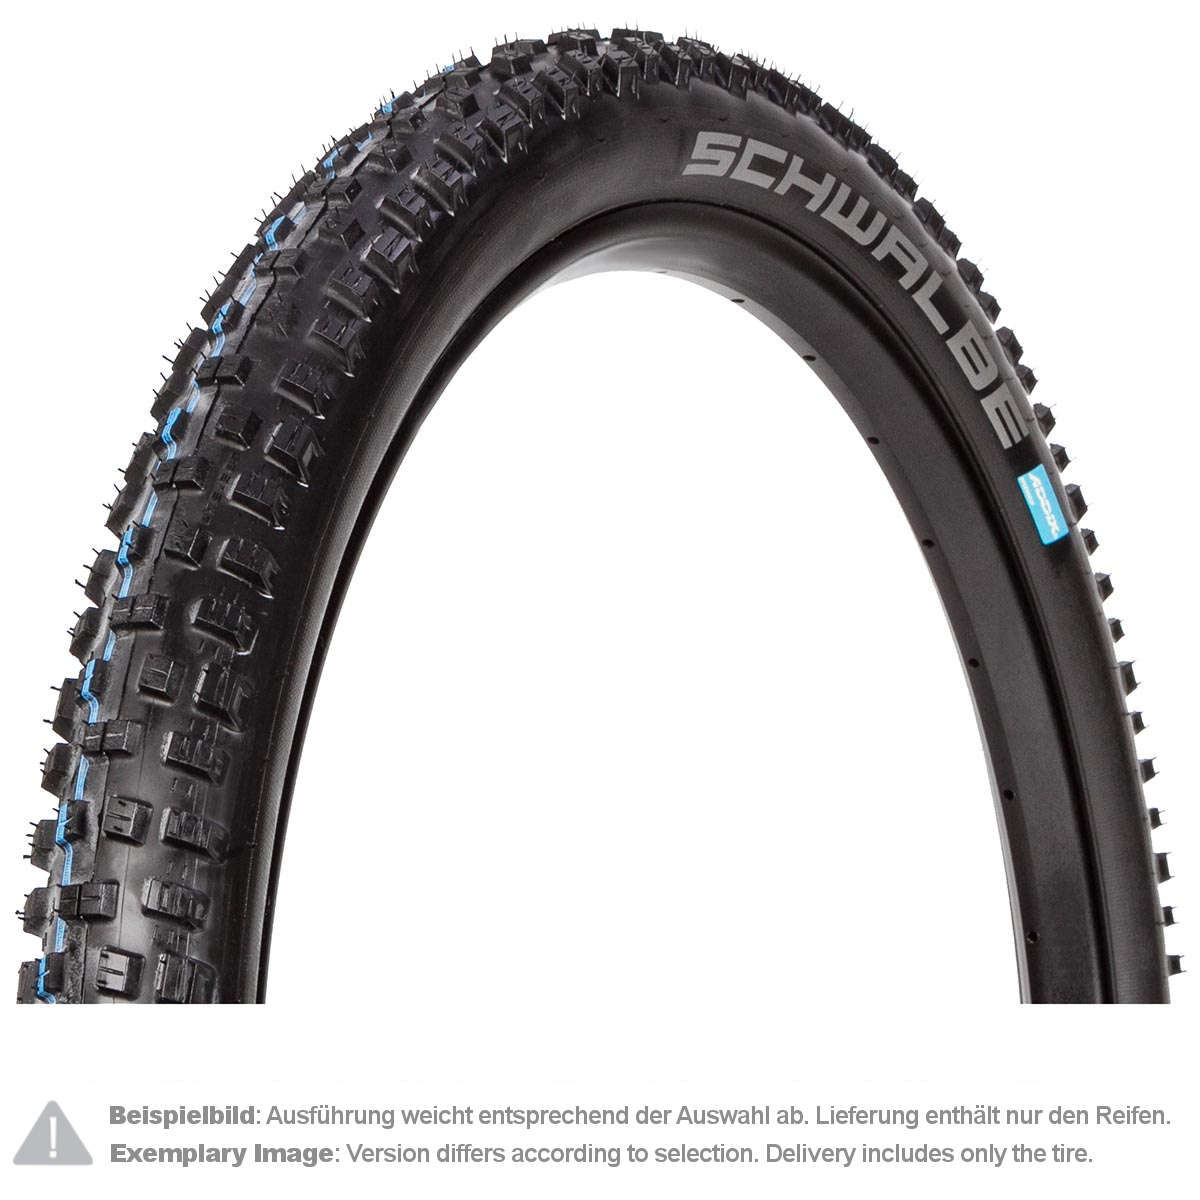 Schwalbe MTB Tire Nobby Nic HS 463 Black, 27.5 x 2.35 Inches, SnakeSkin, Tubeless Easy, Addix Performance, Foldable